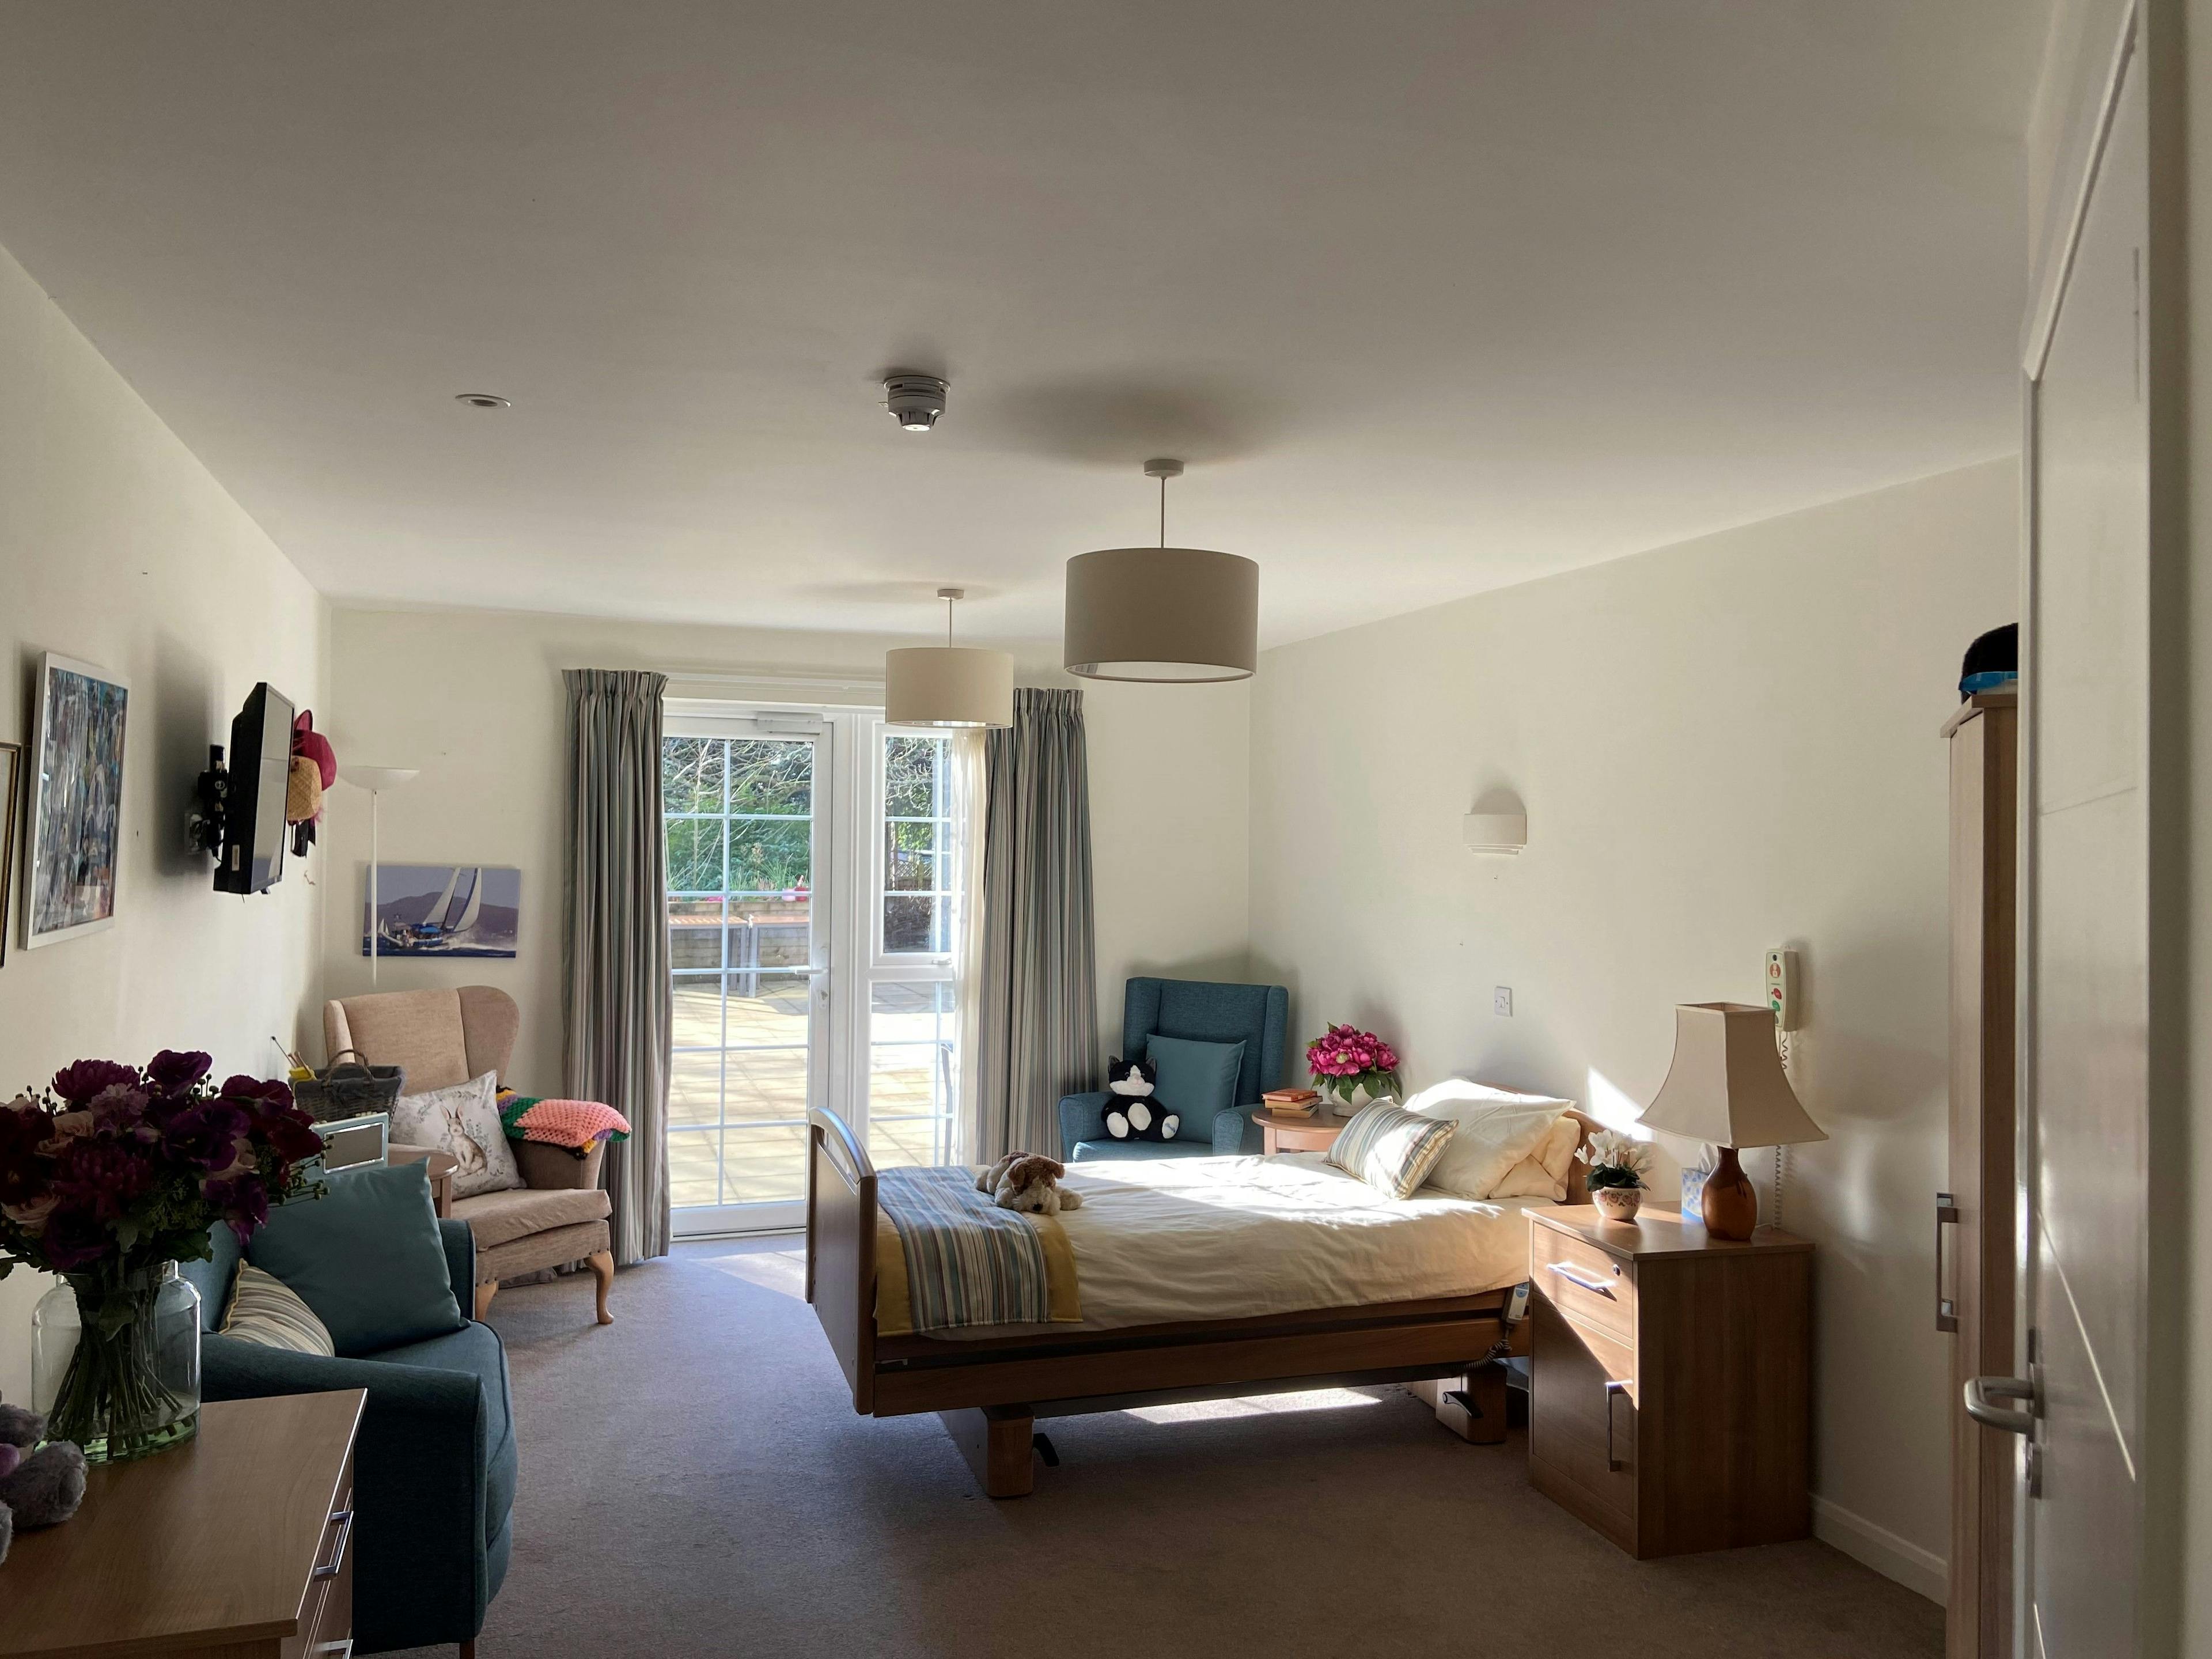 Bedroom at Downs House Care Home in Petersfield, Hampshire